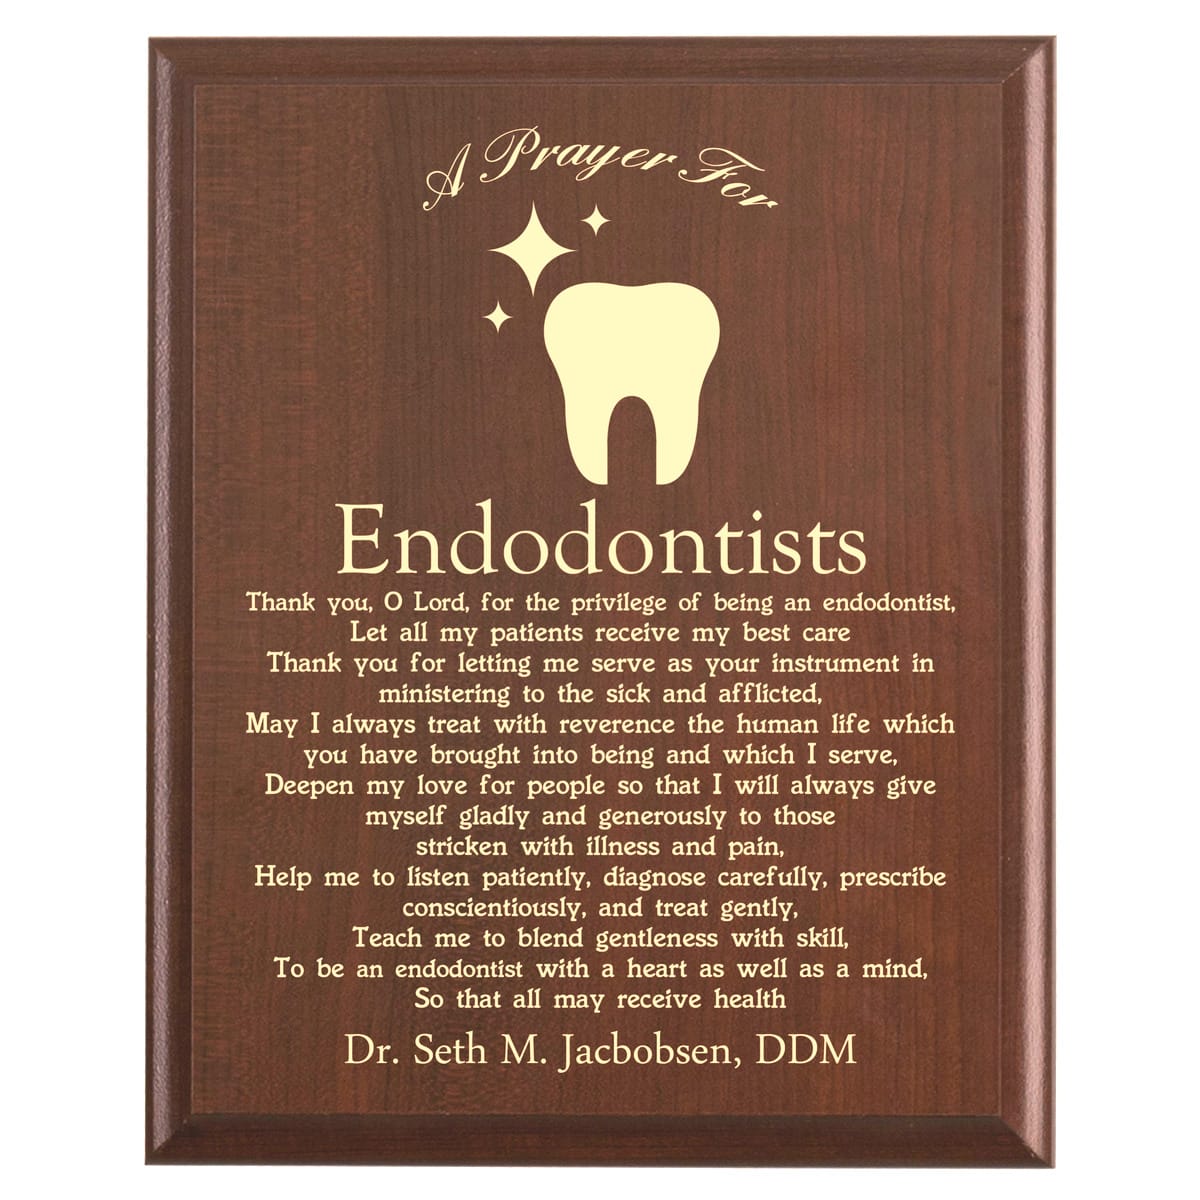 Plaque photo: Endodontist Prayer Plaque design with free personalization. Wood style finish with customized text.